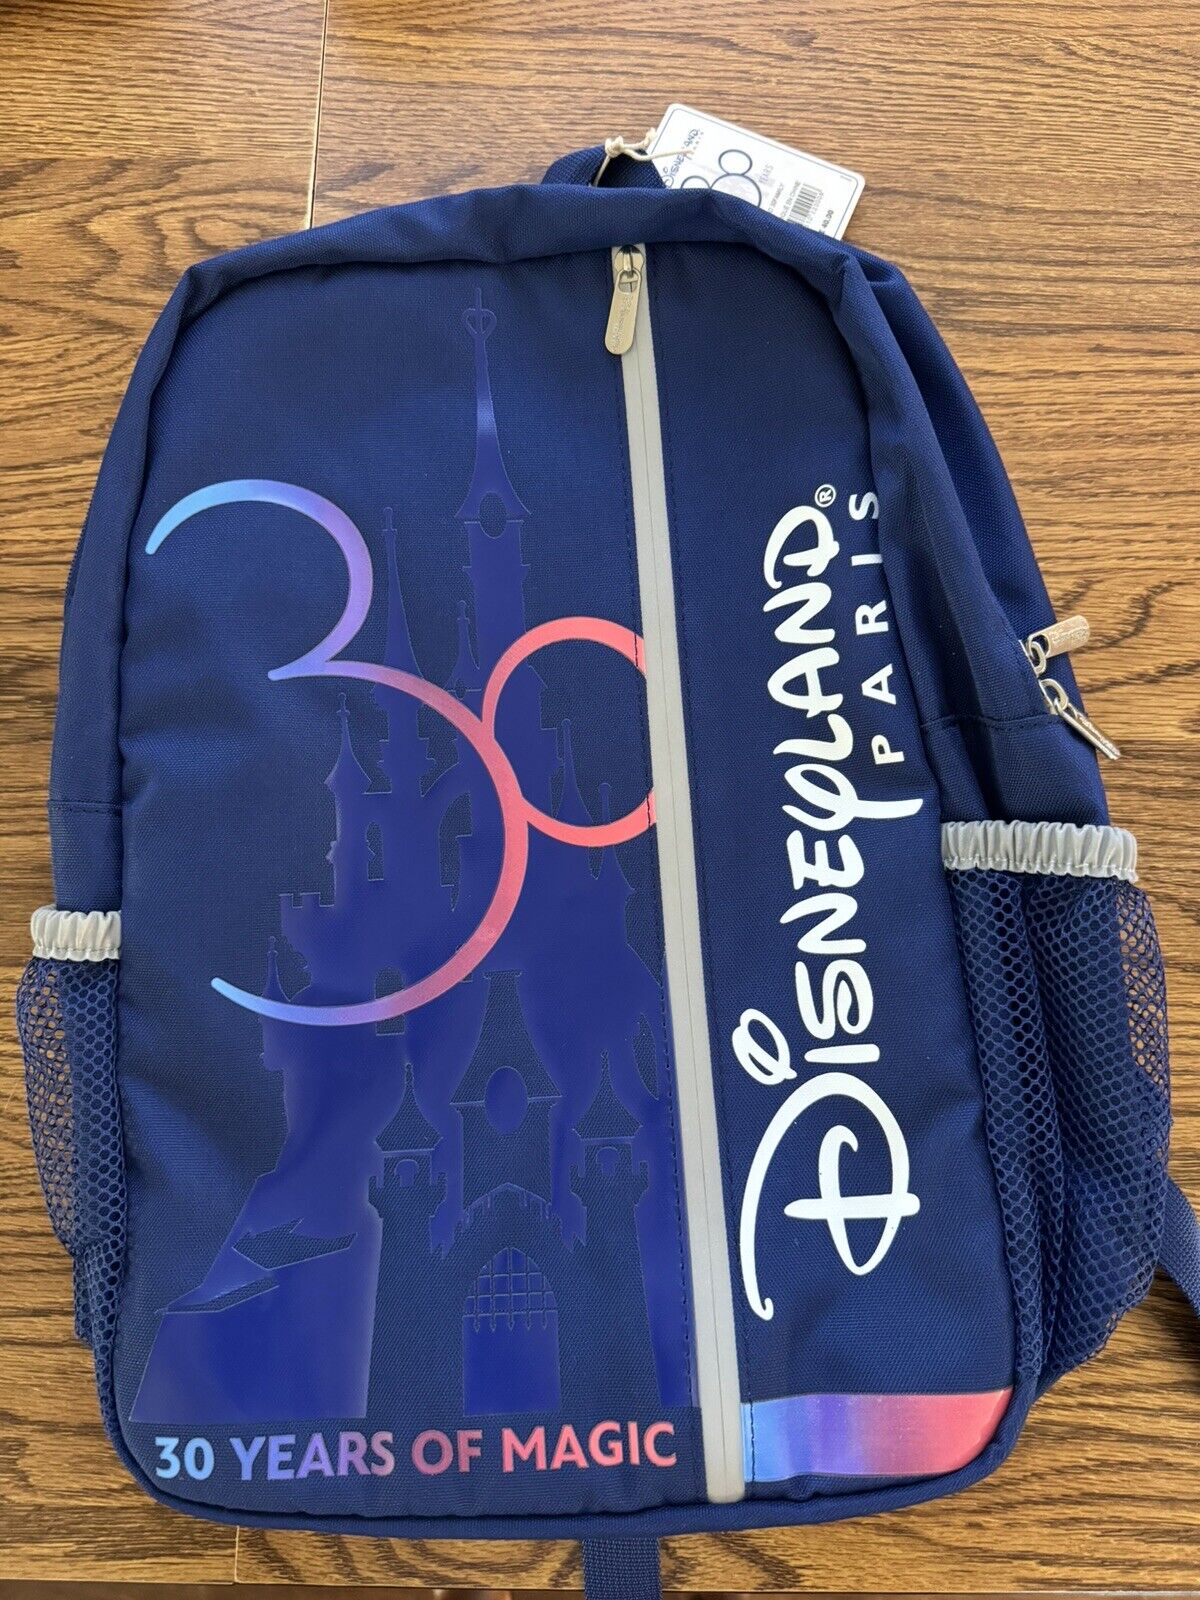 Disneyland Paris 30th Anniversary Backpack. BRAND NEW WITH TAGS 